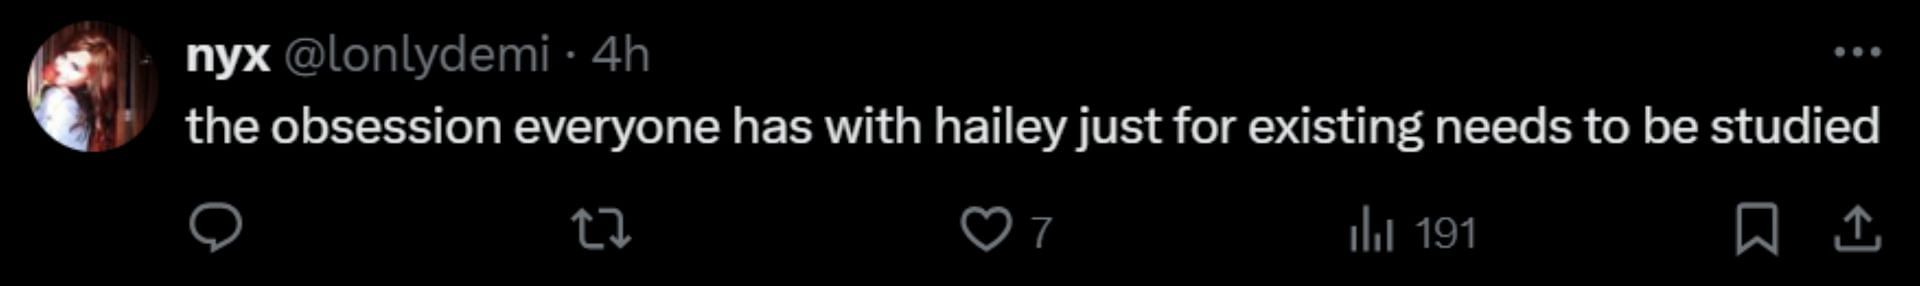 Netizens react to the television host&rsquo;s comments on Hailey Bieber (Image via X)